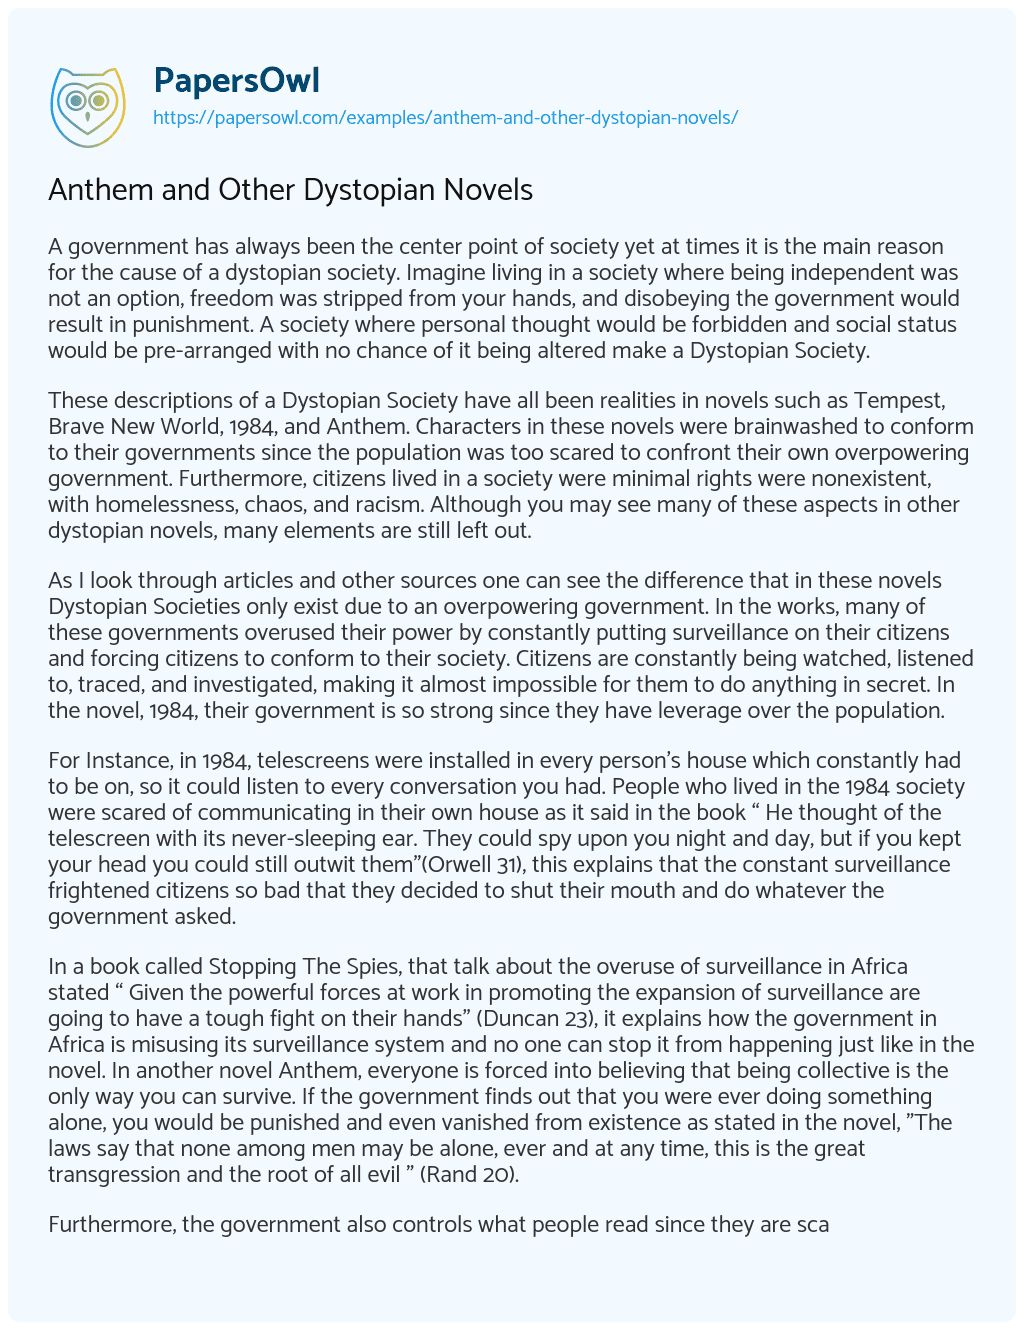 Essay on Anthem and other Dystopian Novels